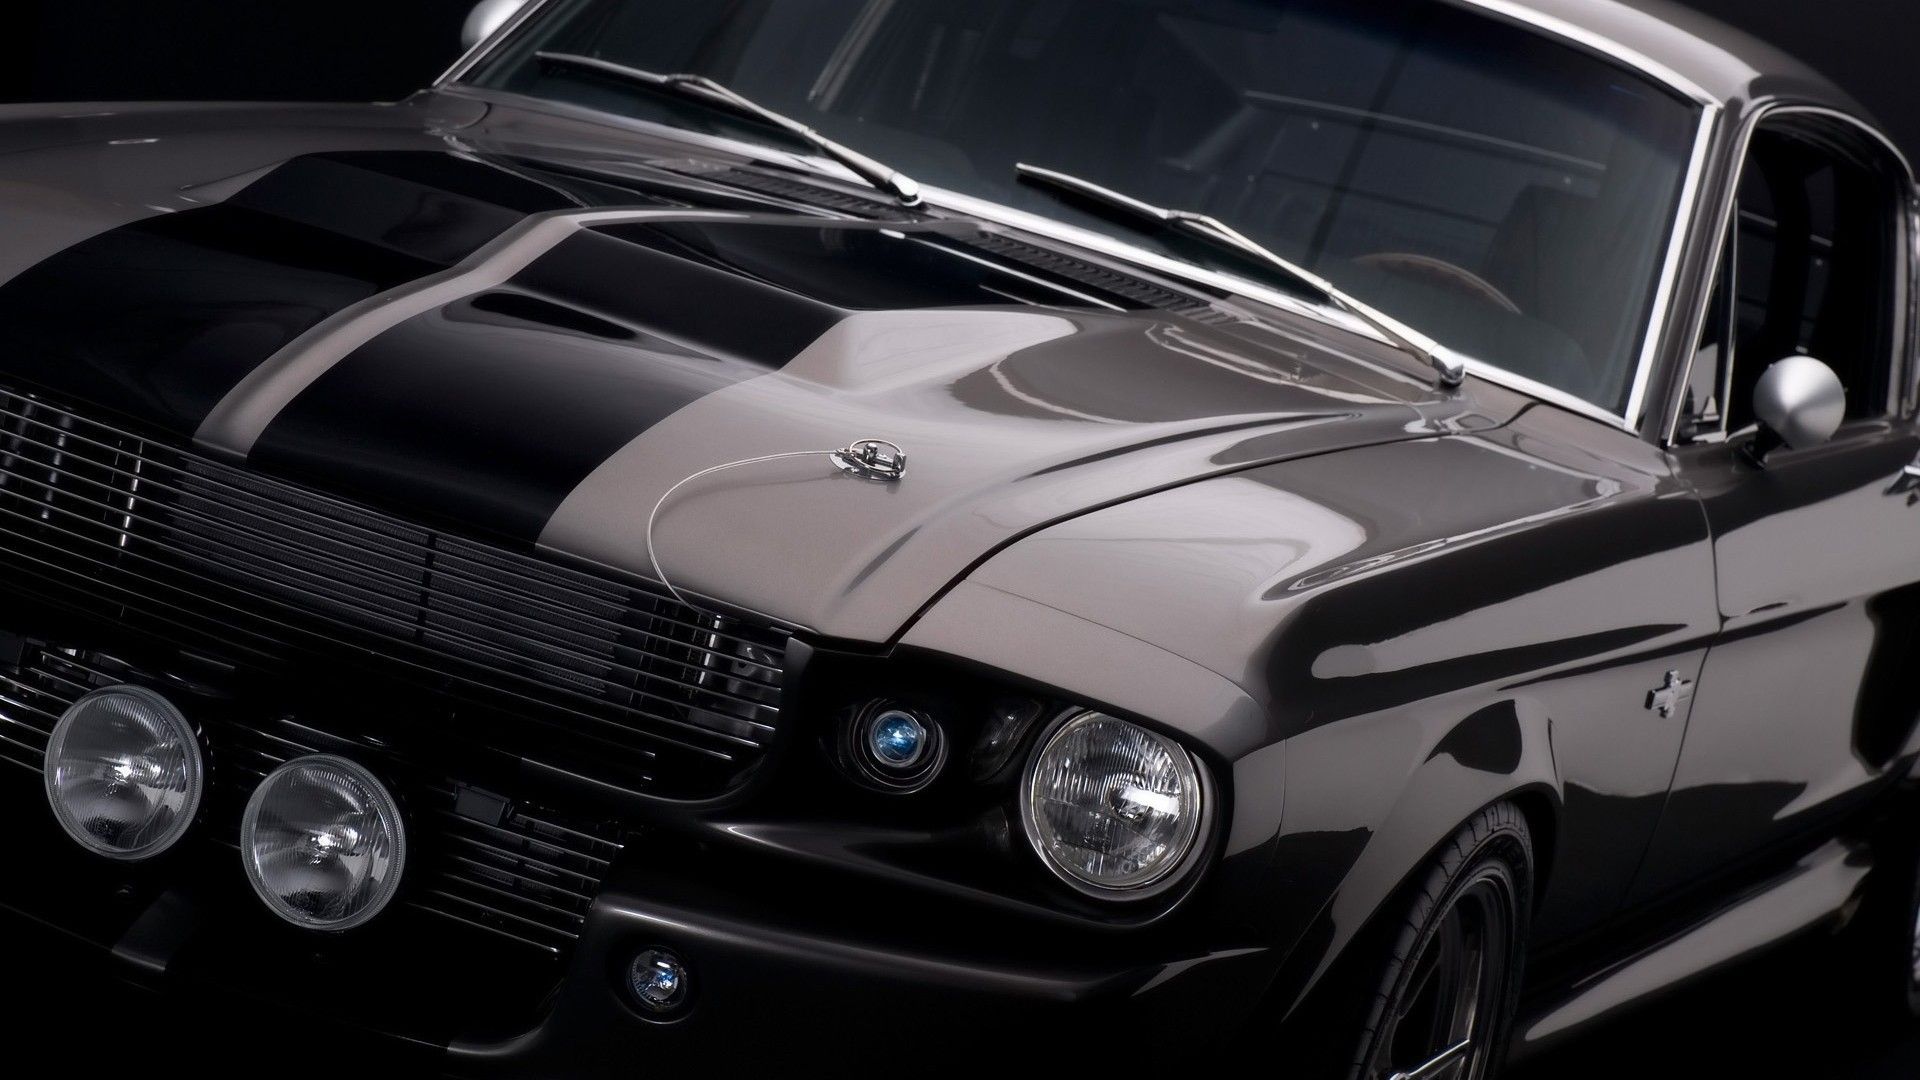 Ford Mustang Shelby Gt500 HD Wallpaper 1920x1080 ID34931